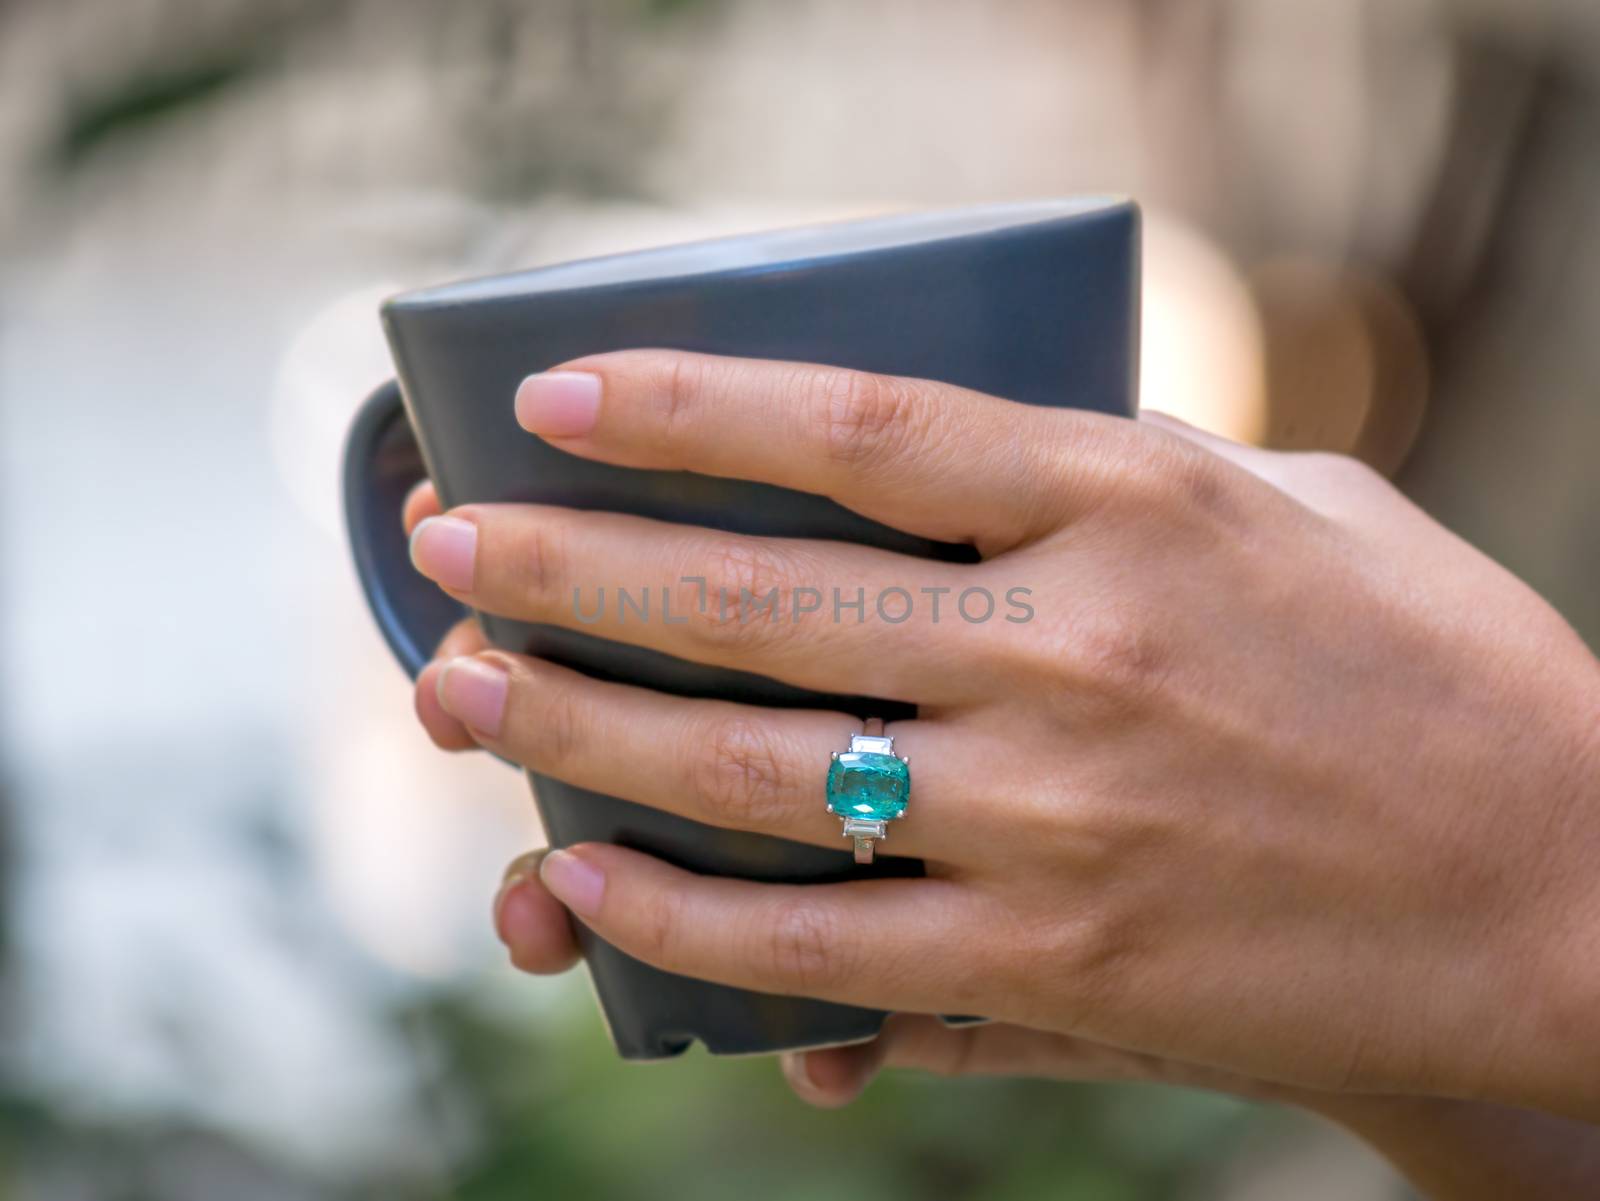 Closup female hand holding coffee cup and wearing green gem ring with white diamond on finger